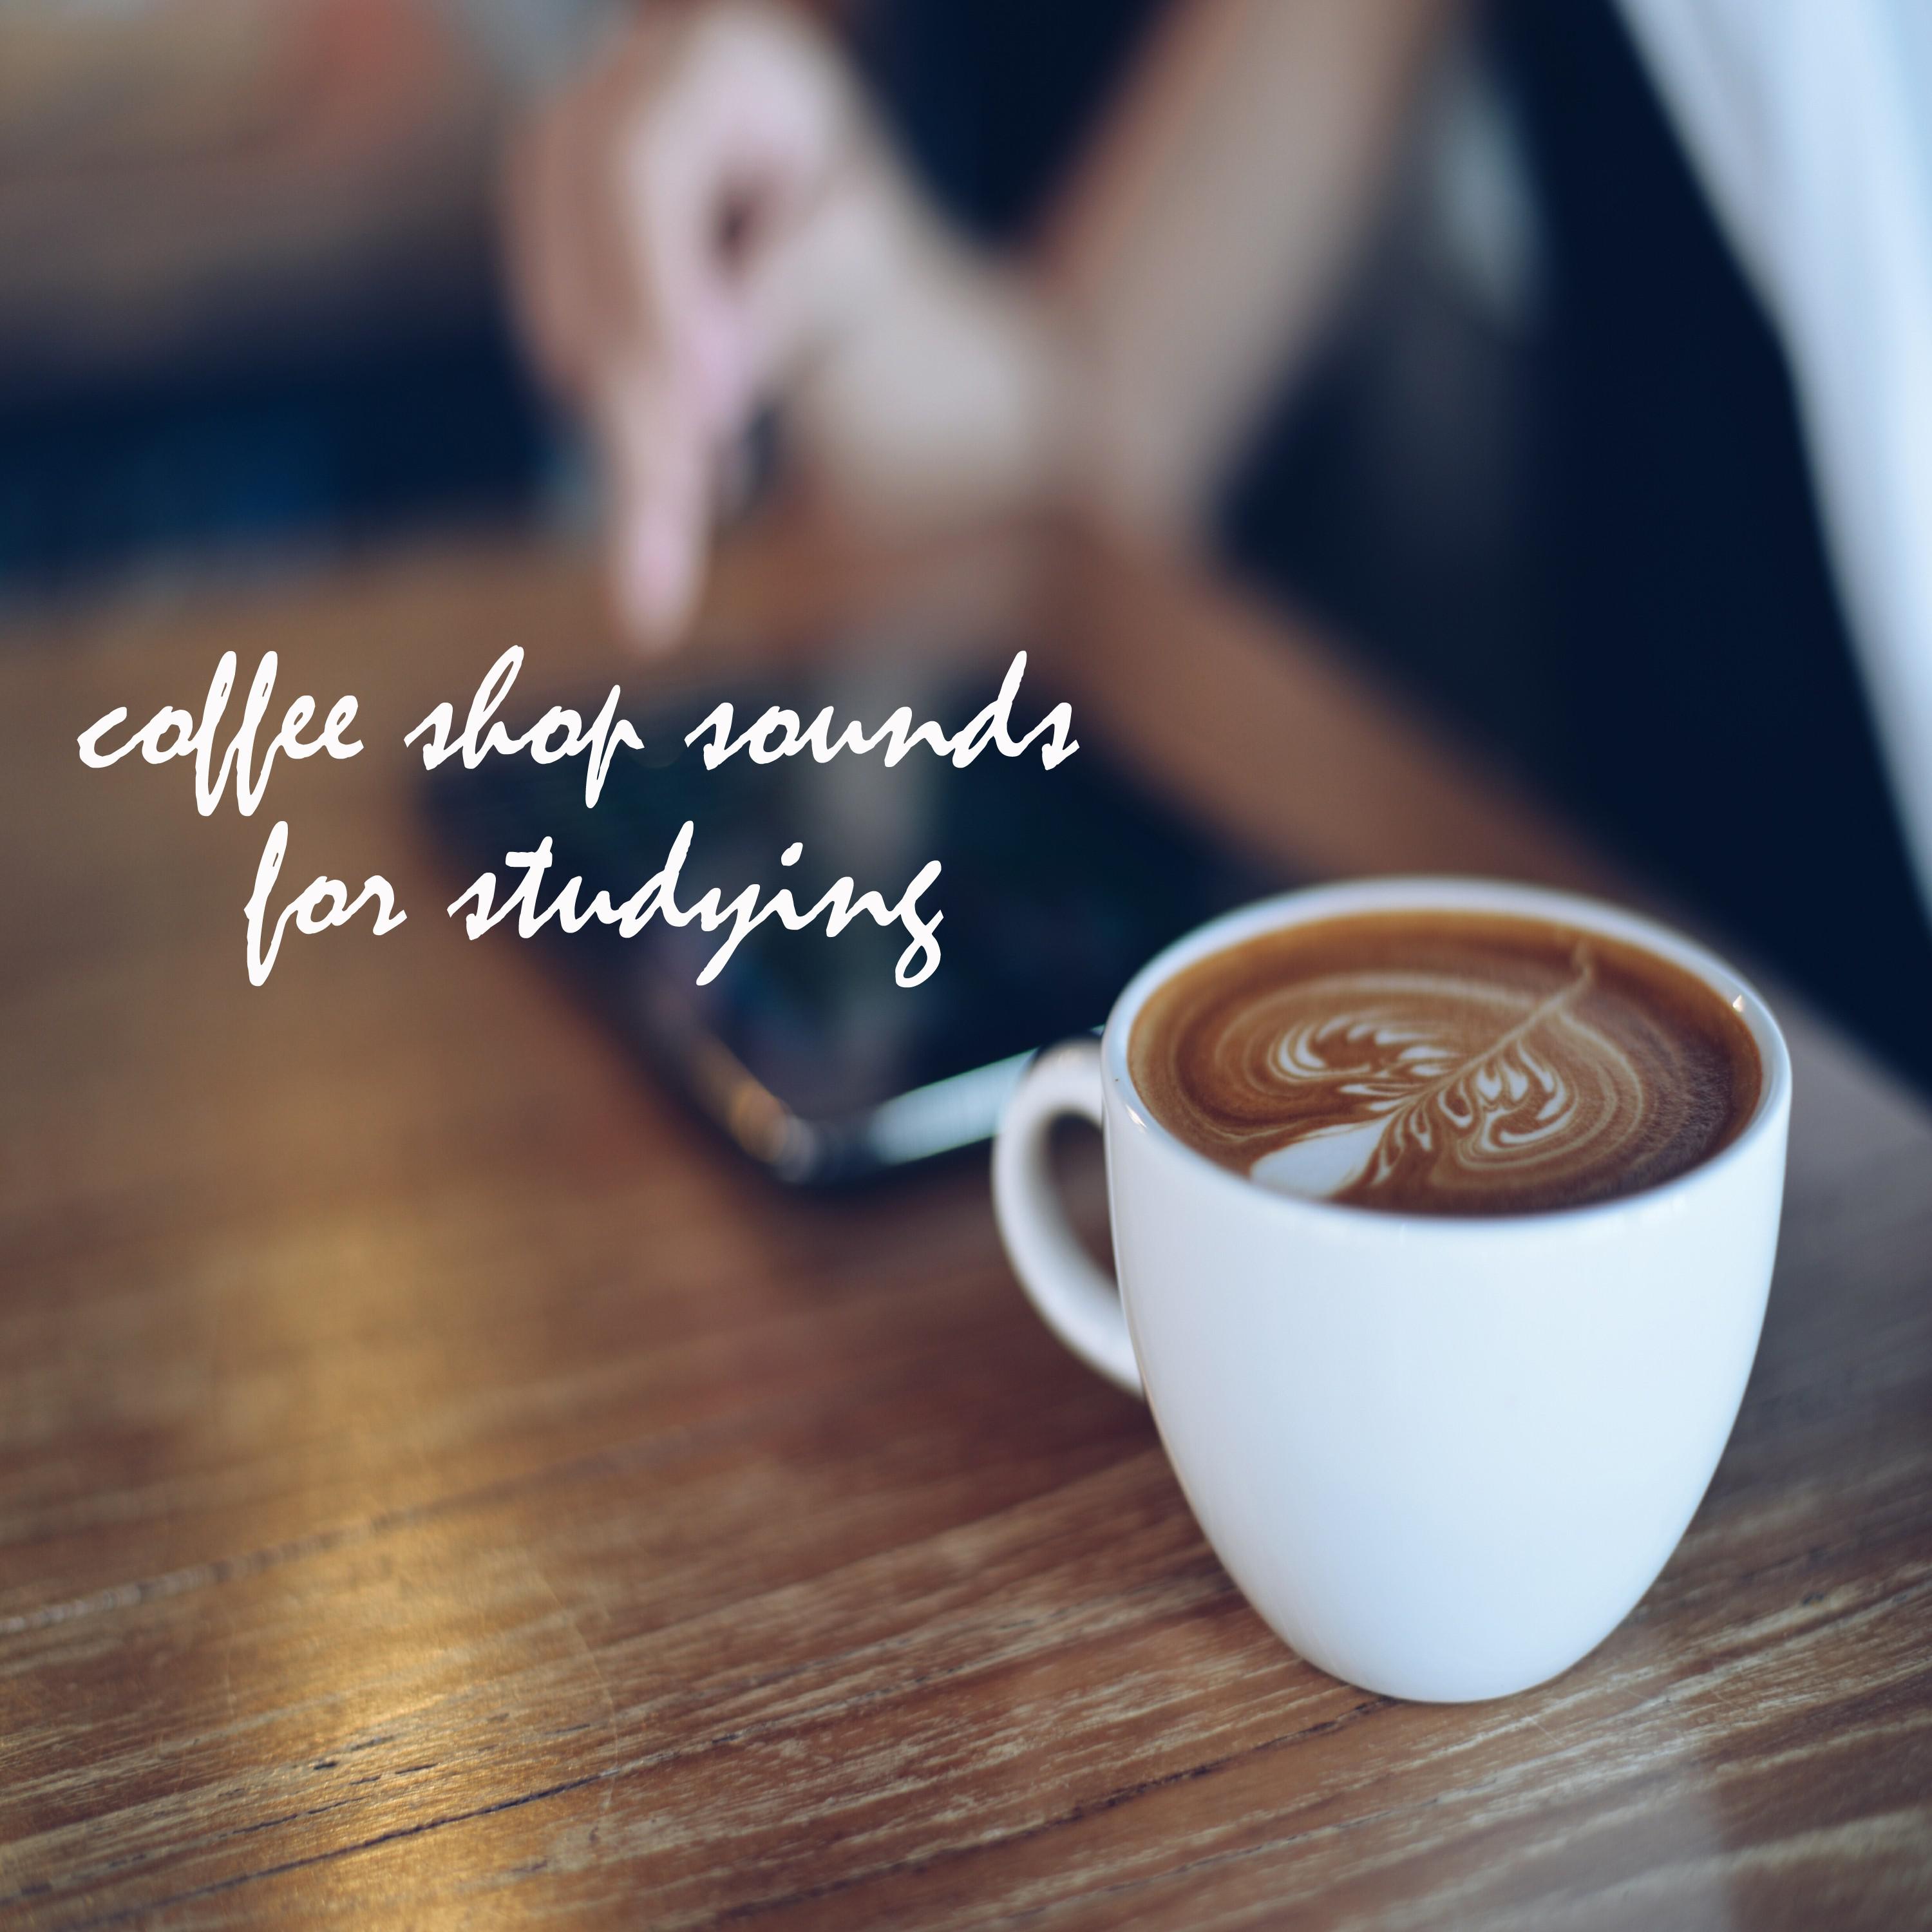 Coffee Shop Sounds for Studying and Working, Pt. 49